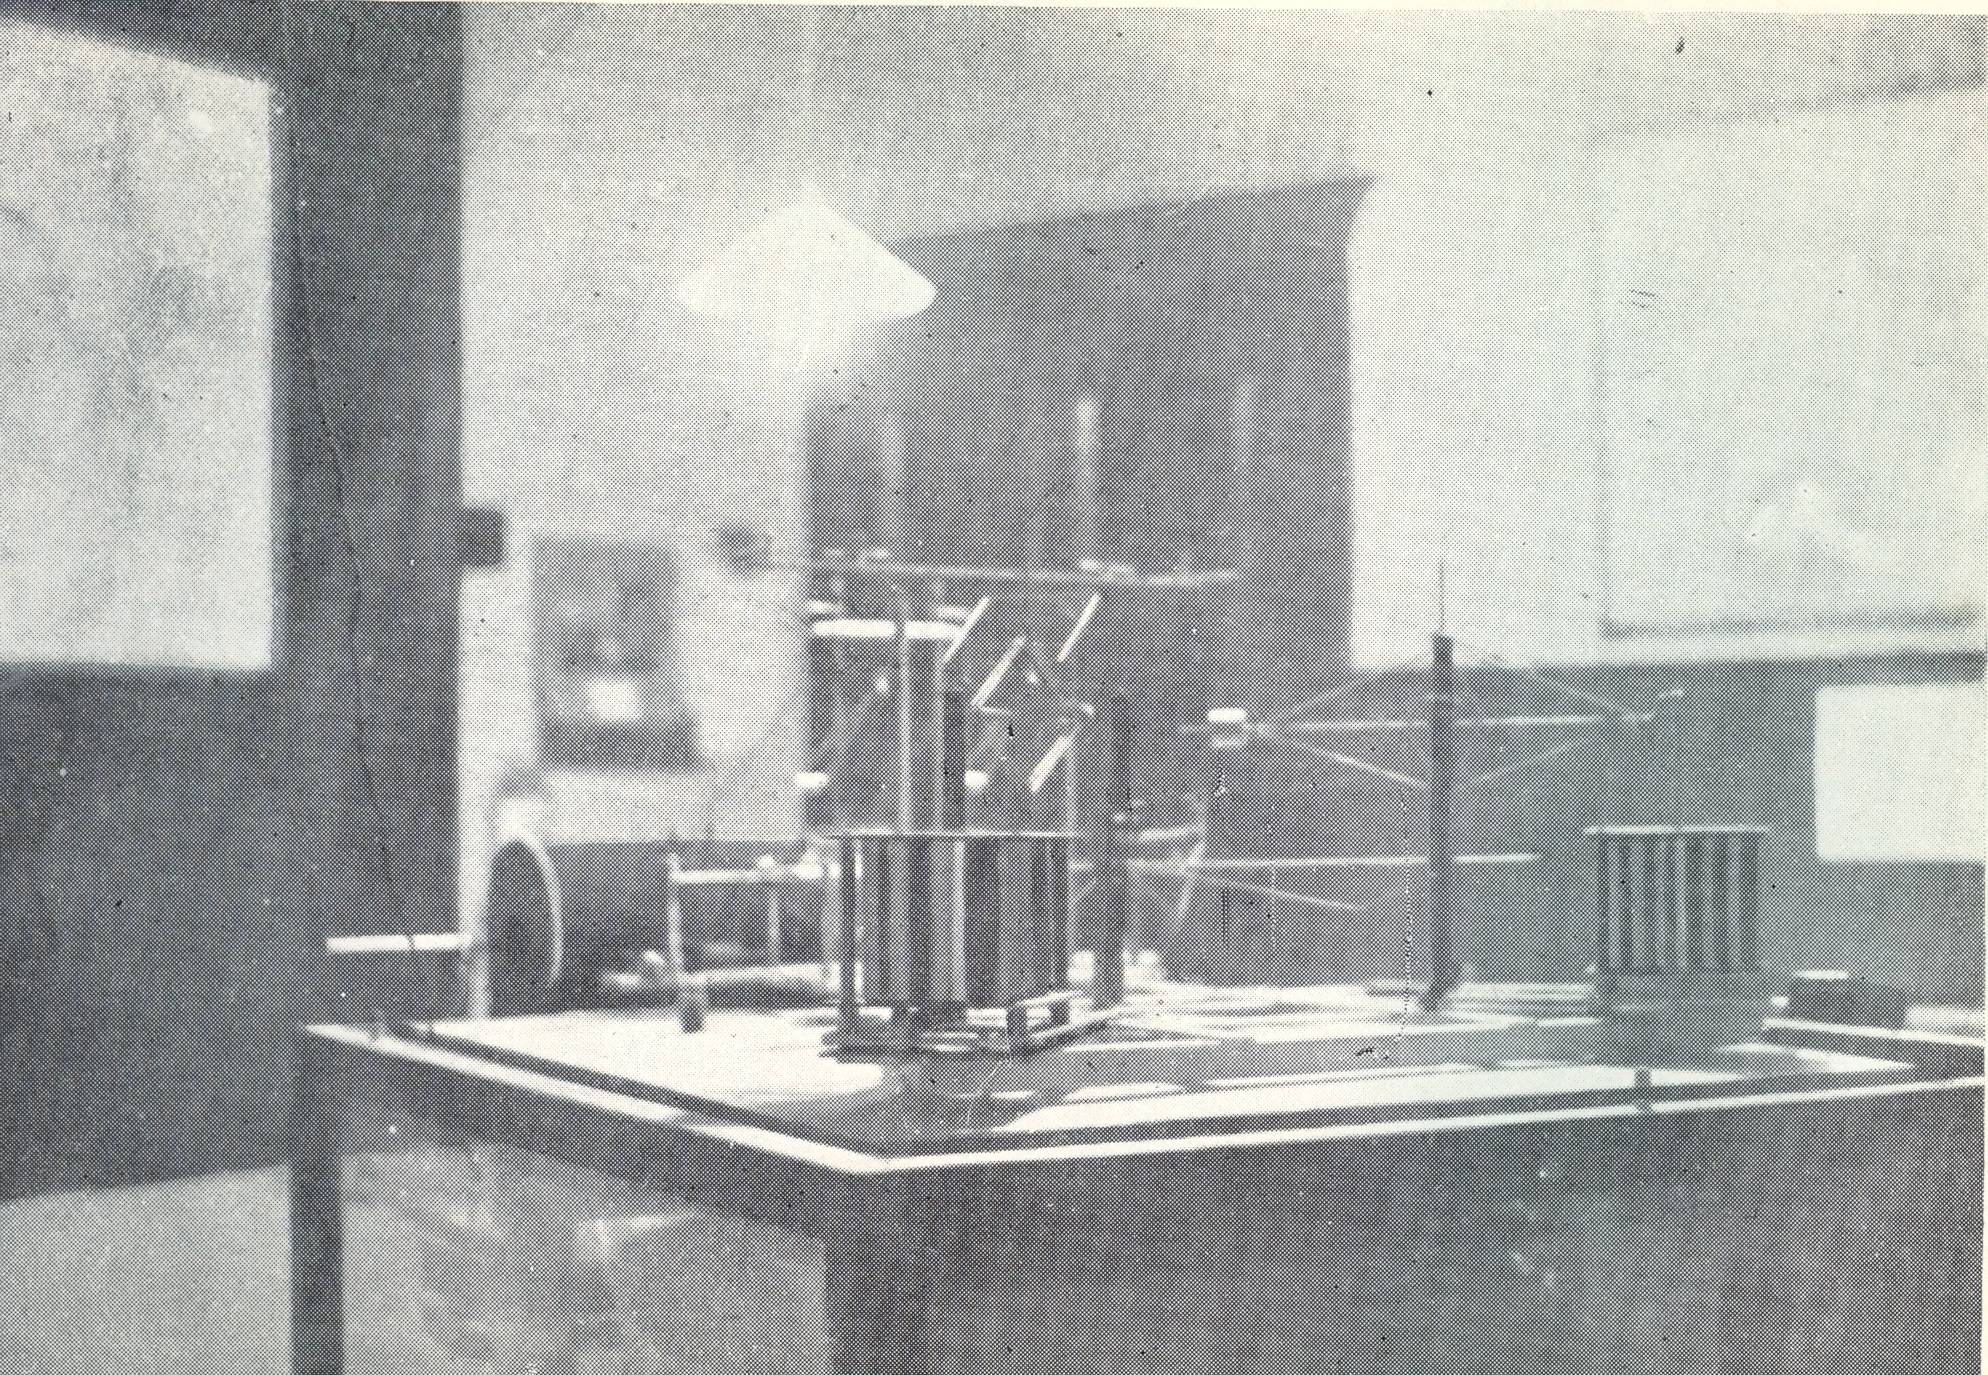 In 1932, a Milne-Shaw seismograph was obtained to replace the ‘O Leary seismograph’. Courtesy of the Irish Jesuit Archive. 